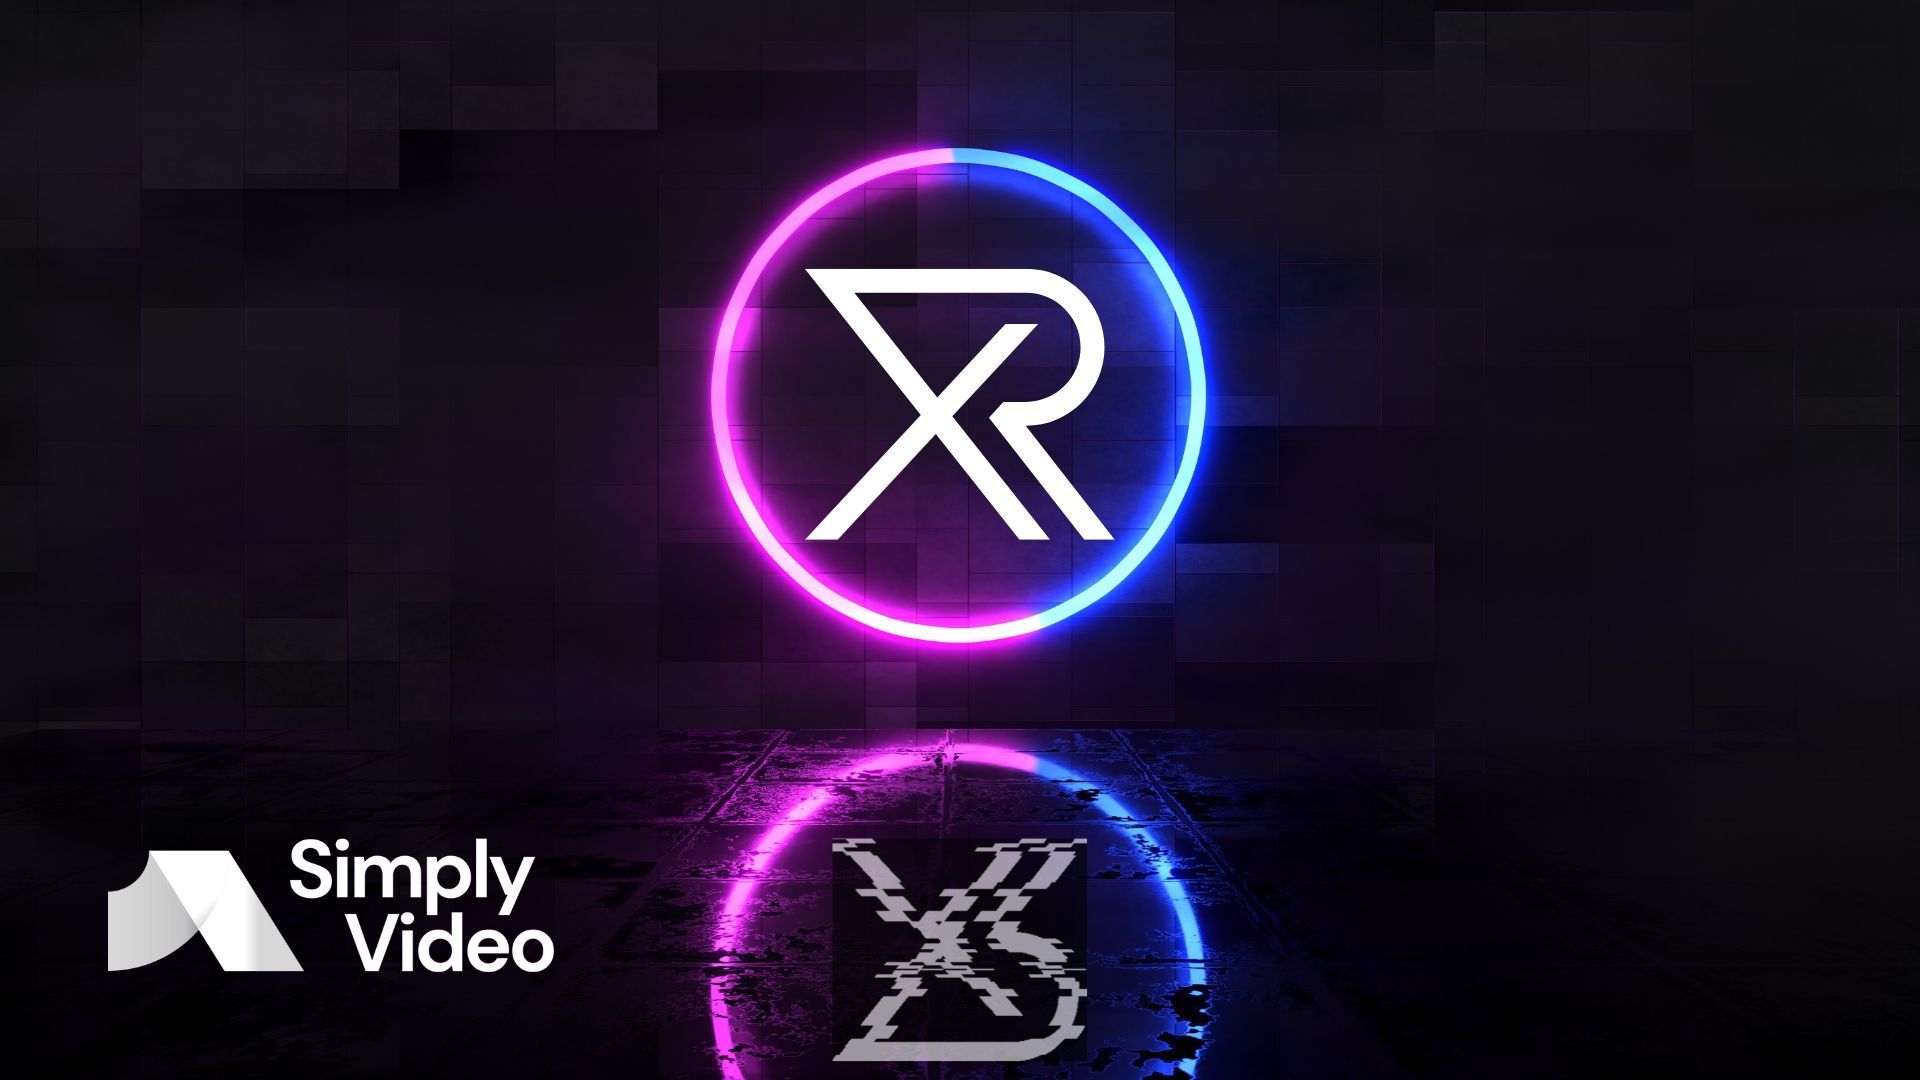 What's happening in the world of extended reality (XR)? Get the latest scoops with our roundup of XR news in February 2023.